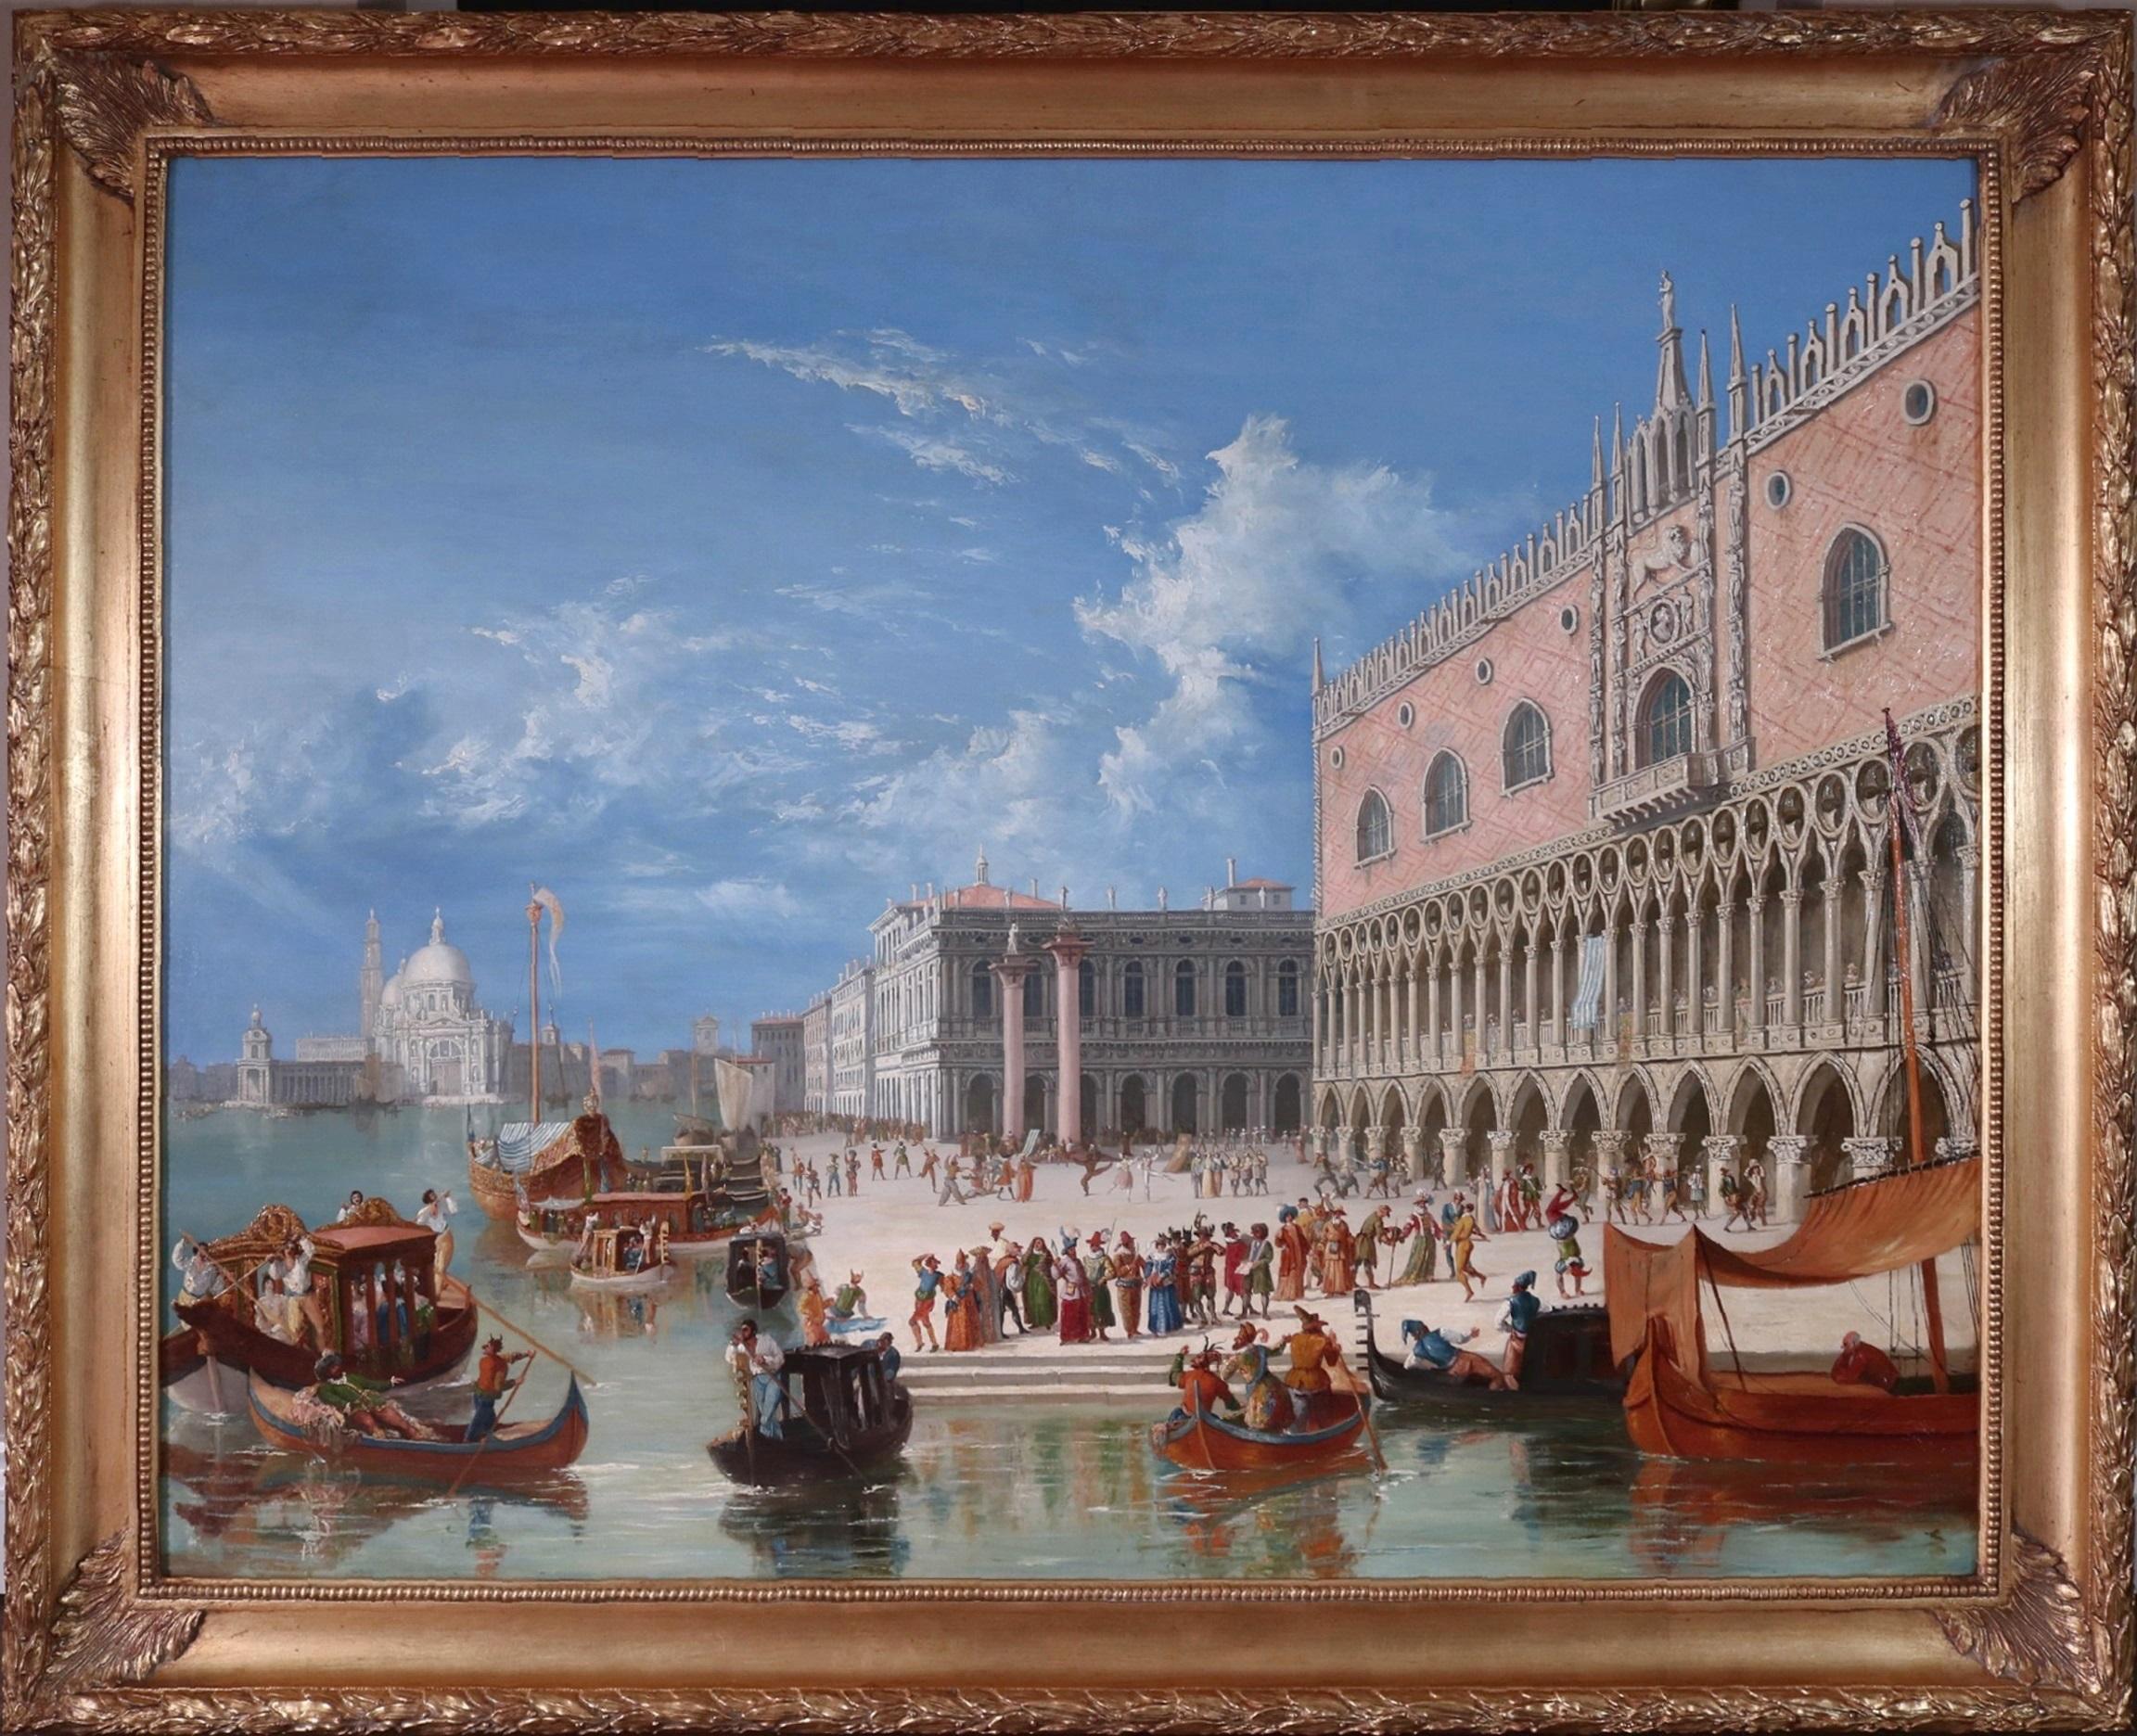 James Holland Figurative Painting - Carnevale di Venezia - Large 19th Century Oil Painting of Venice Italy Canaletto